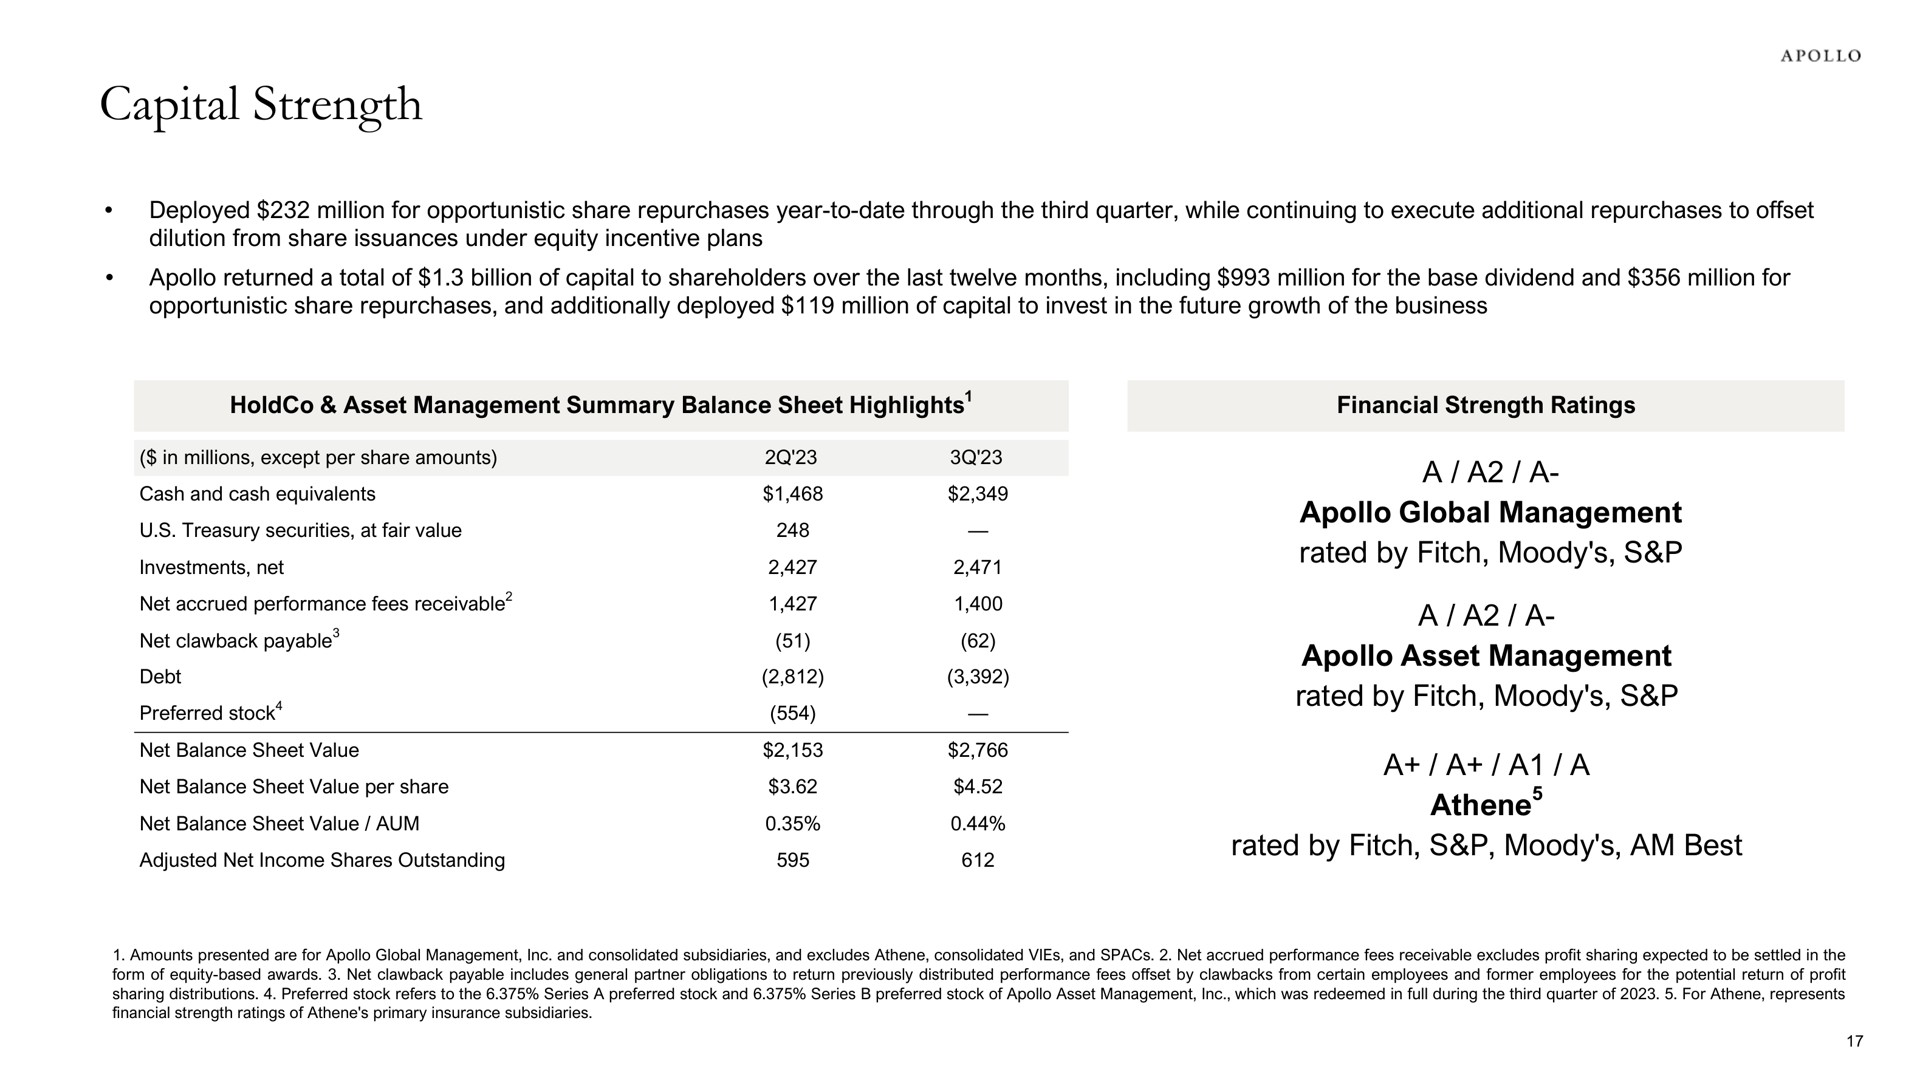 capital strength a a a global management rated by fitch moody a a a asset management rated by fitch moody a a a a rated by fitch moody am best a | Apollo Global Management